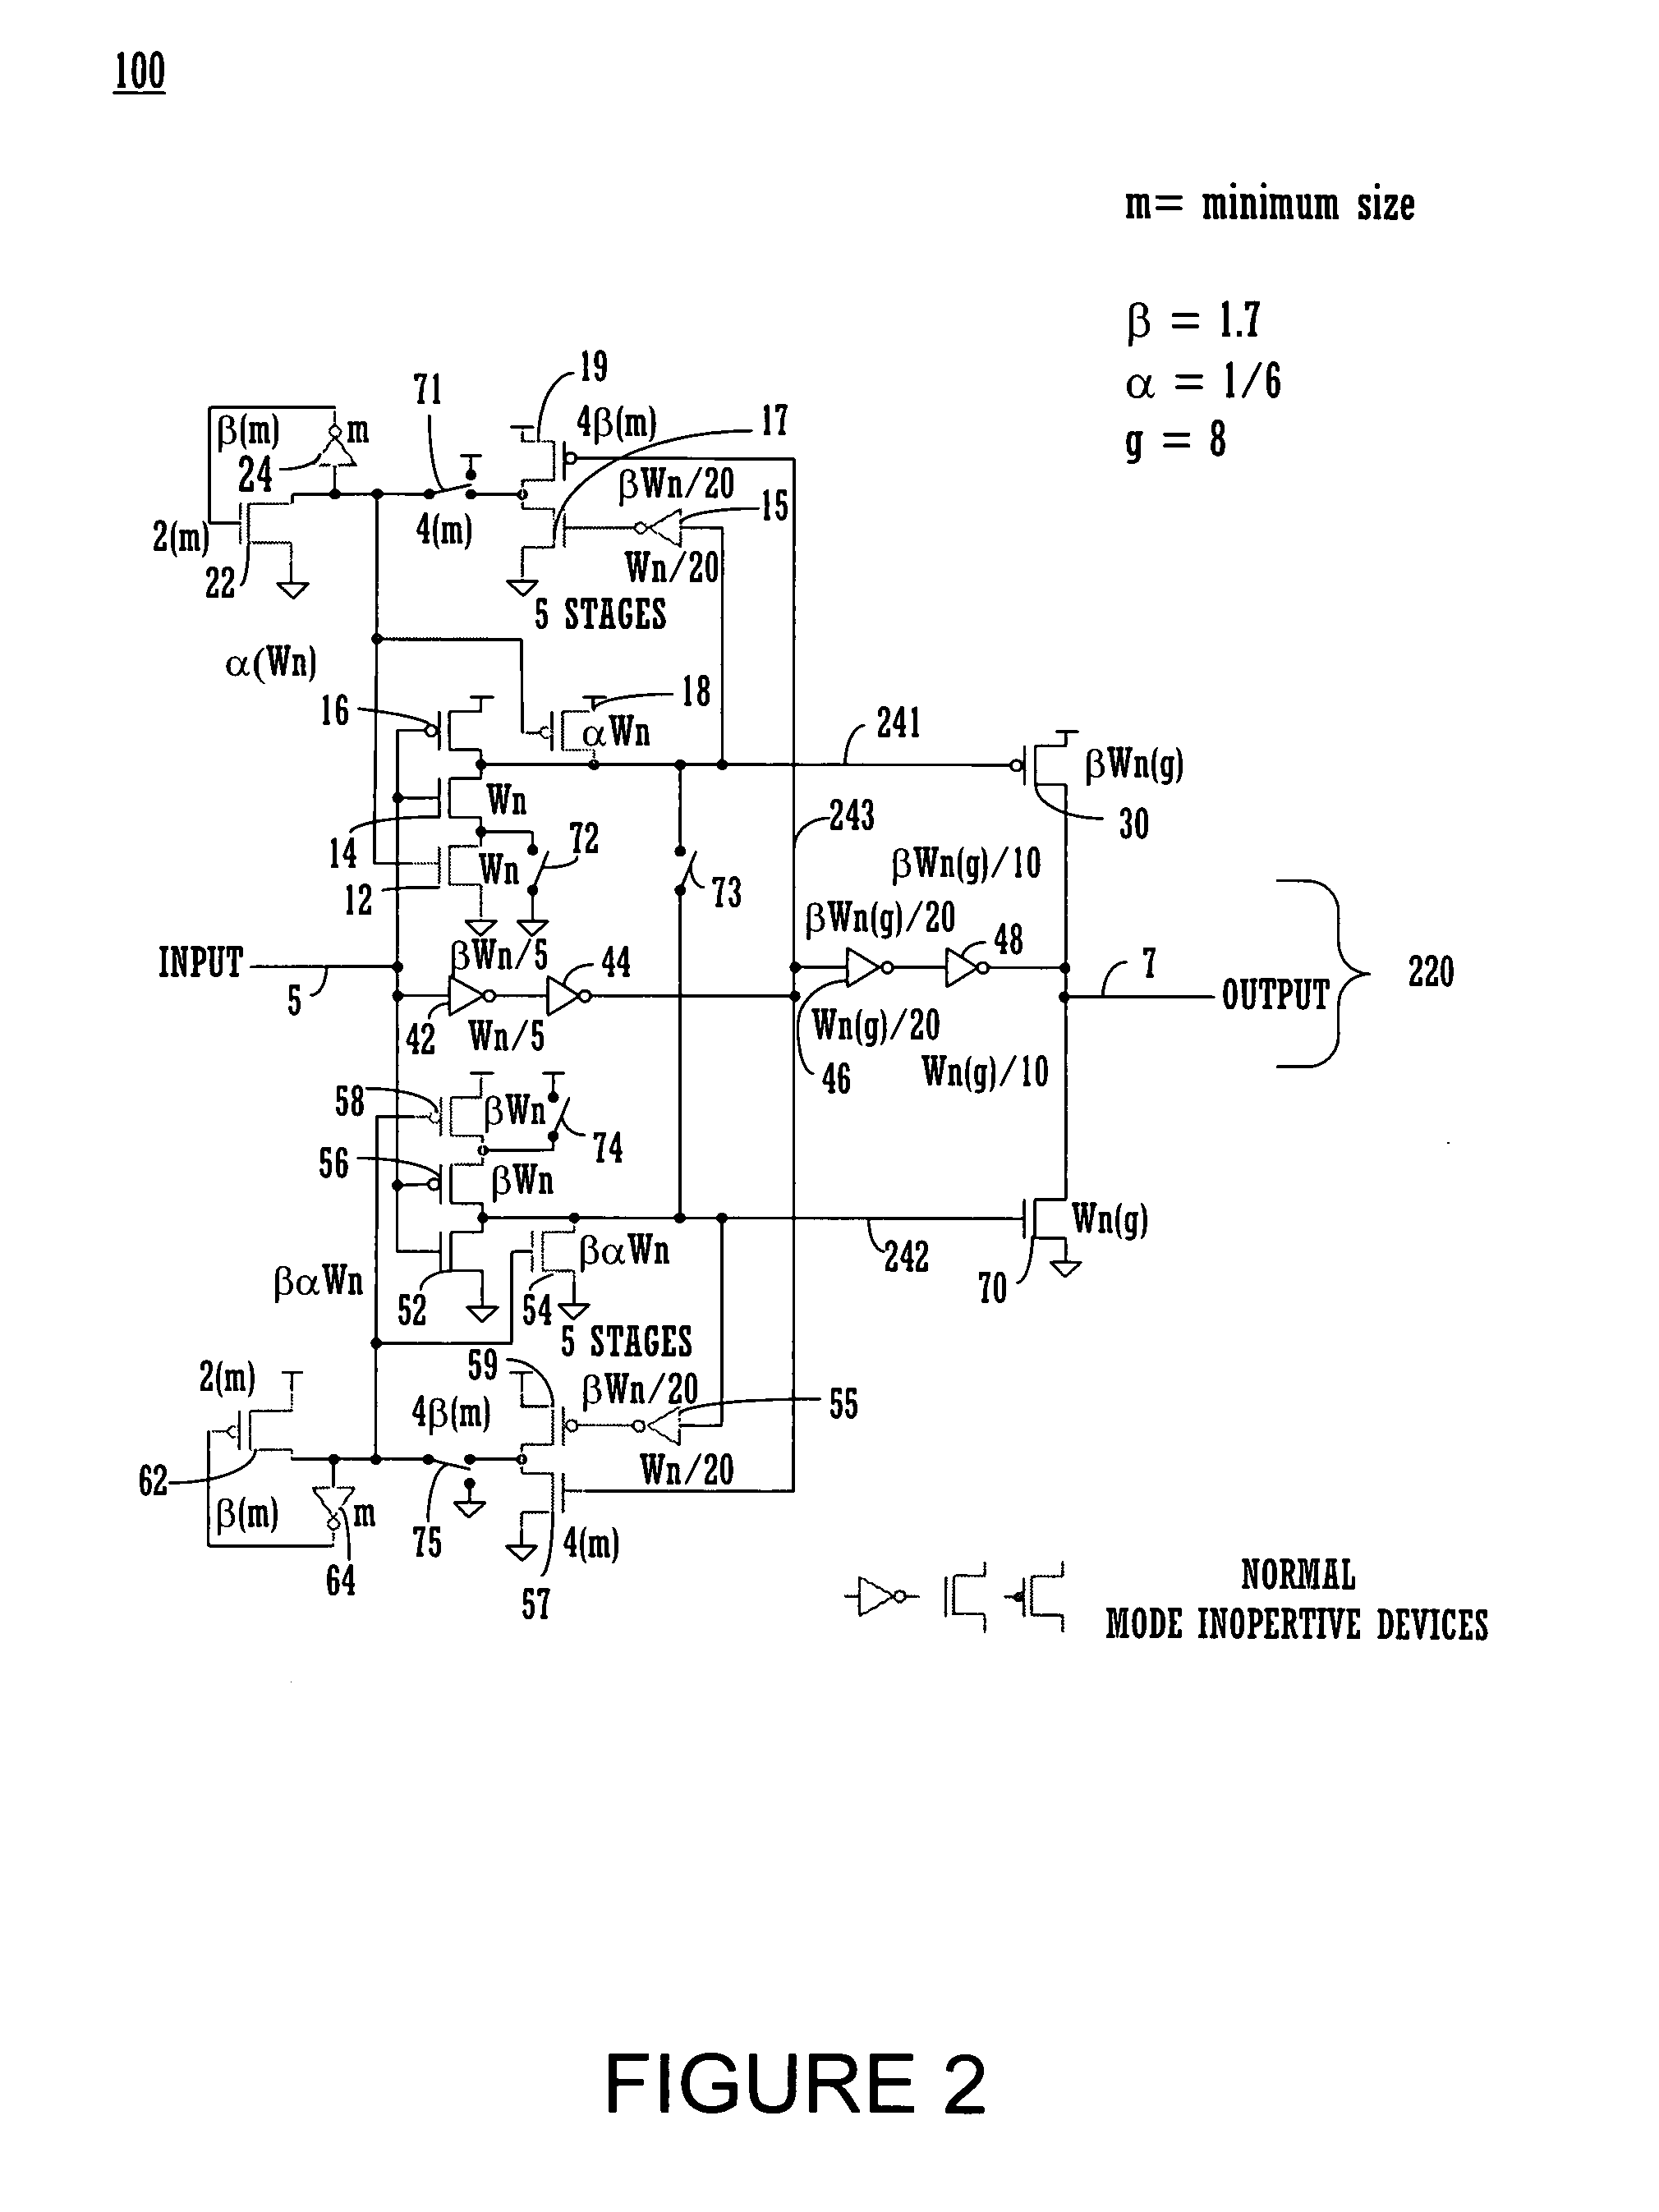 Repeater circuit with high performance repeater mode and normal repeater mode